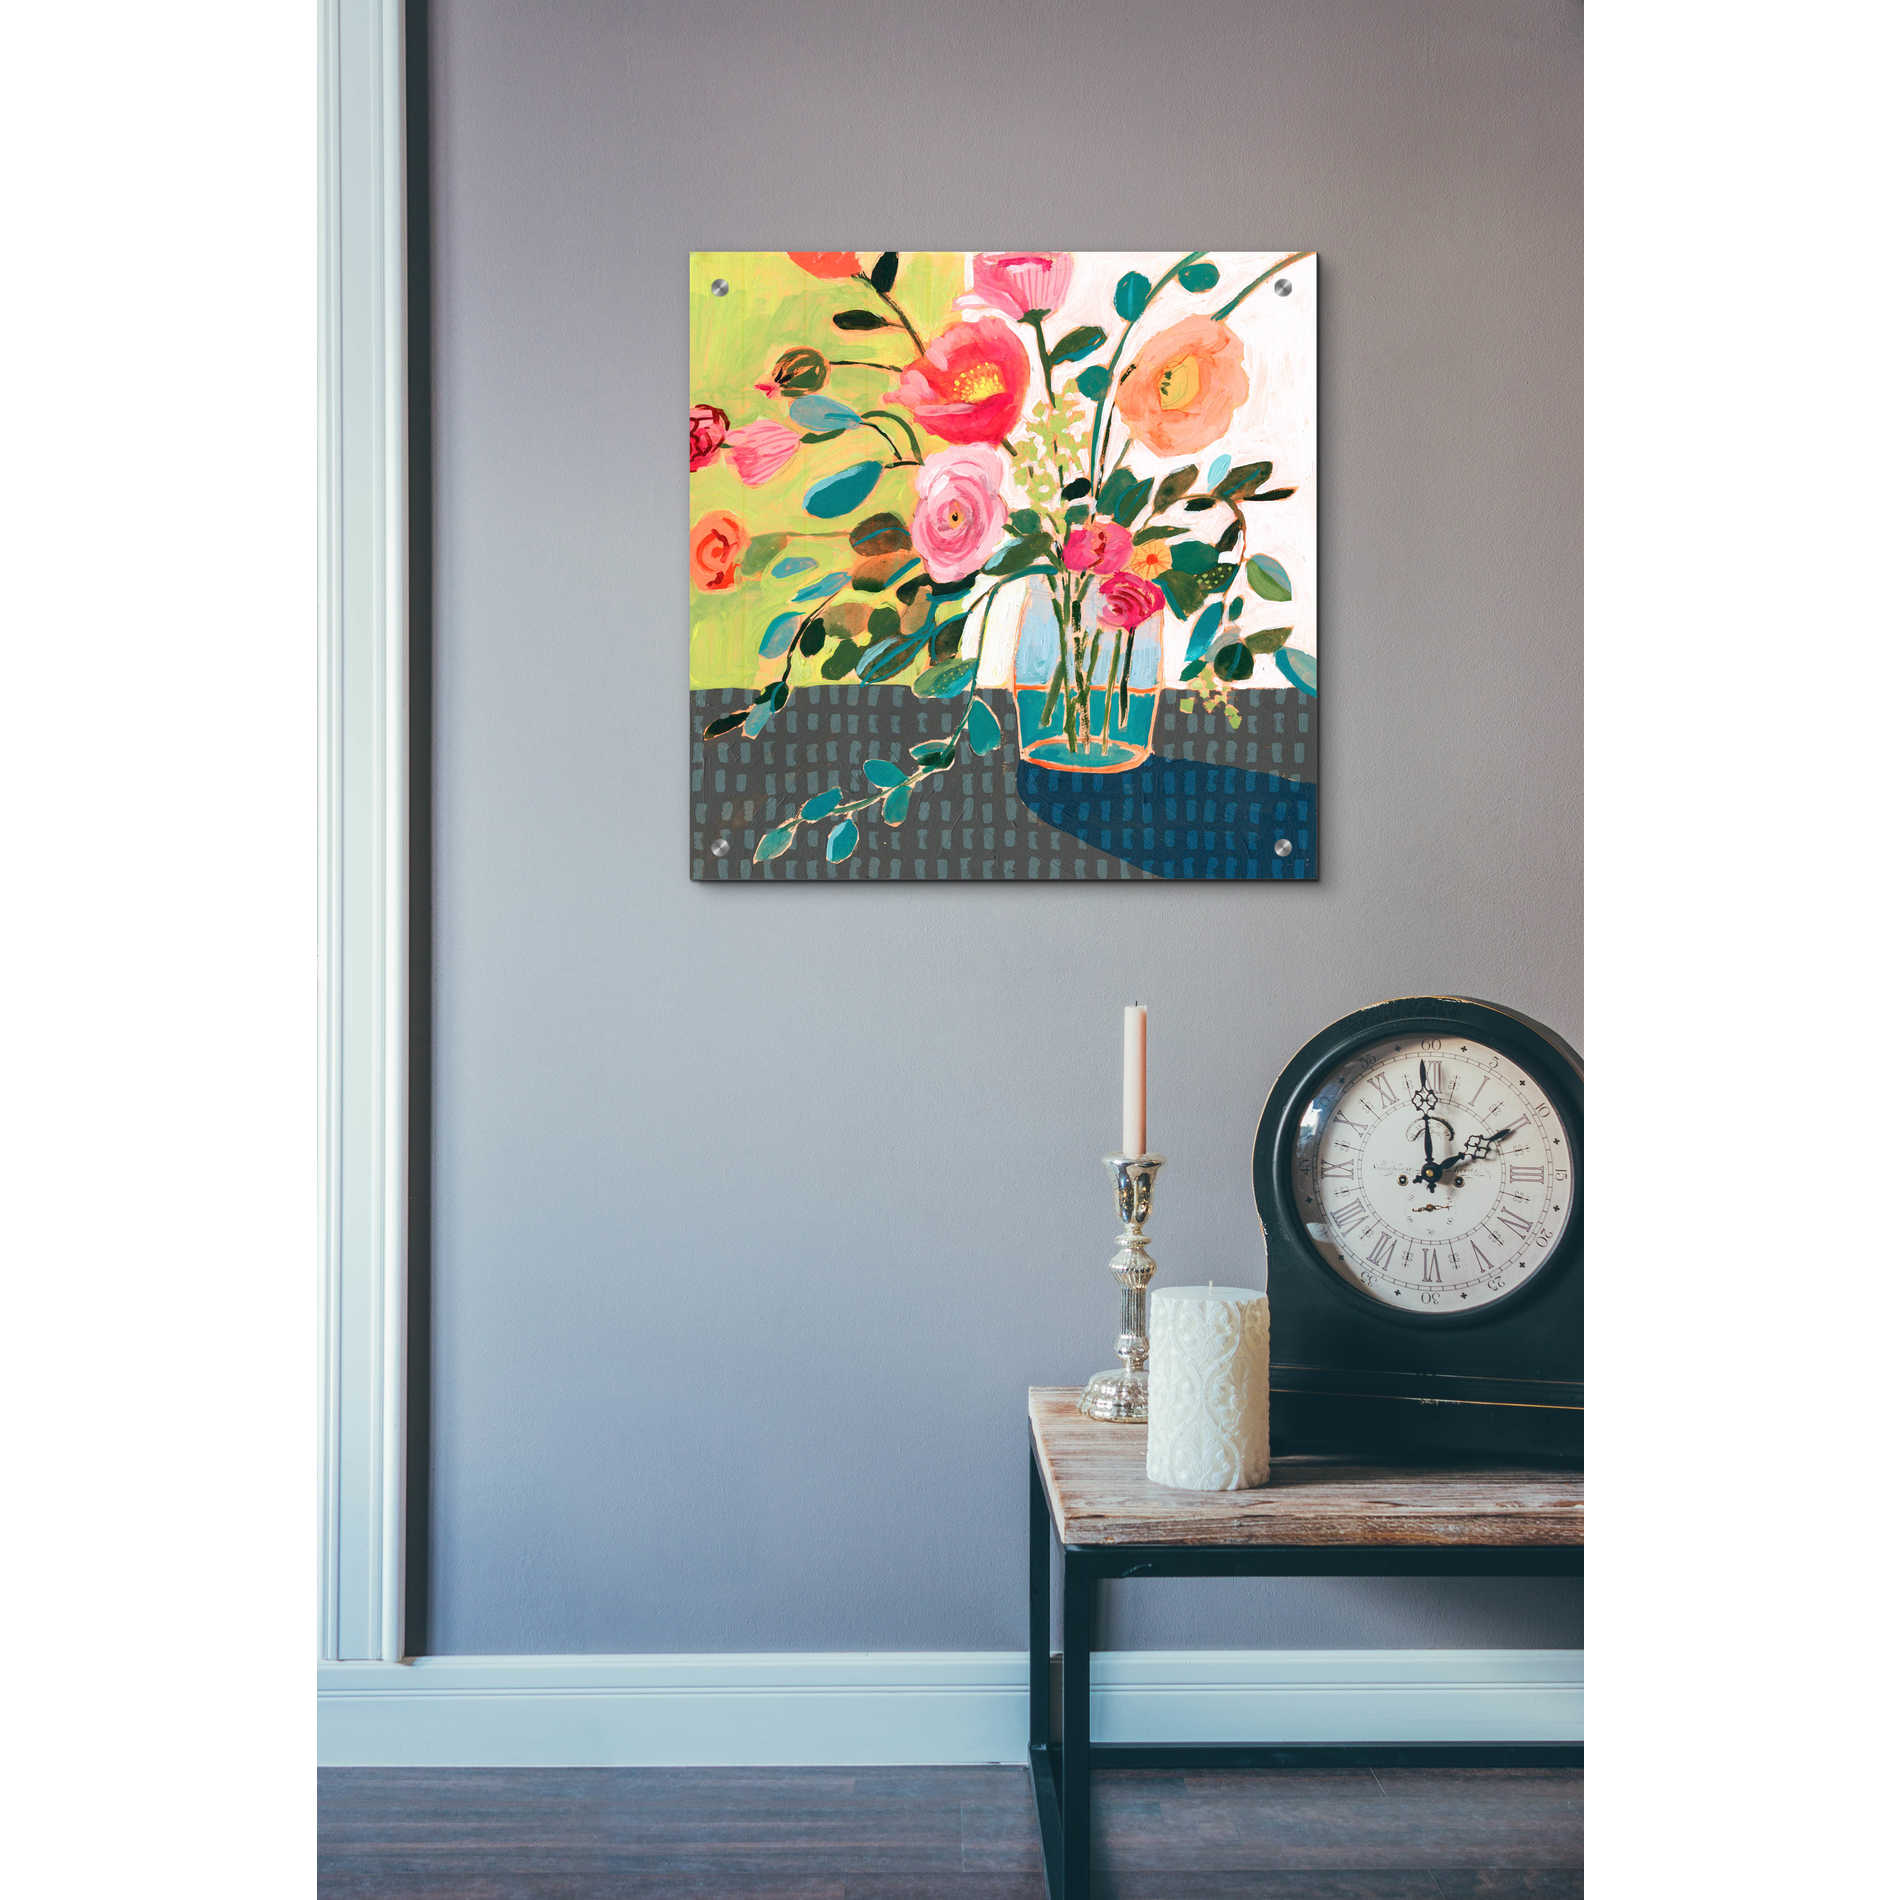 Epic Art 'Quirky Bouquet II' by Victoria Borges, Acrylic Wall Art,24x24